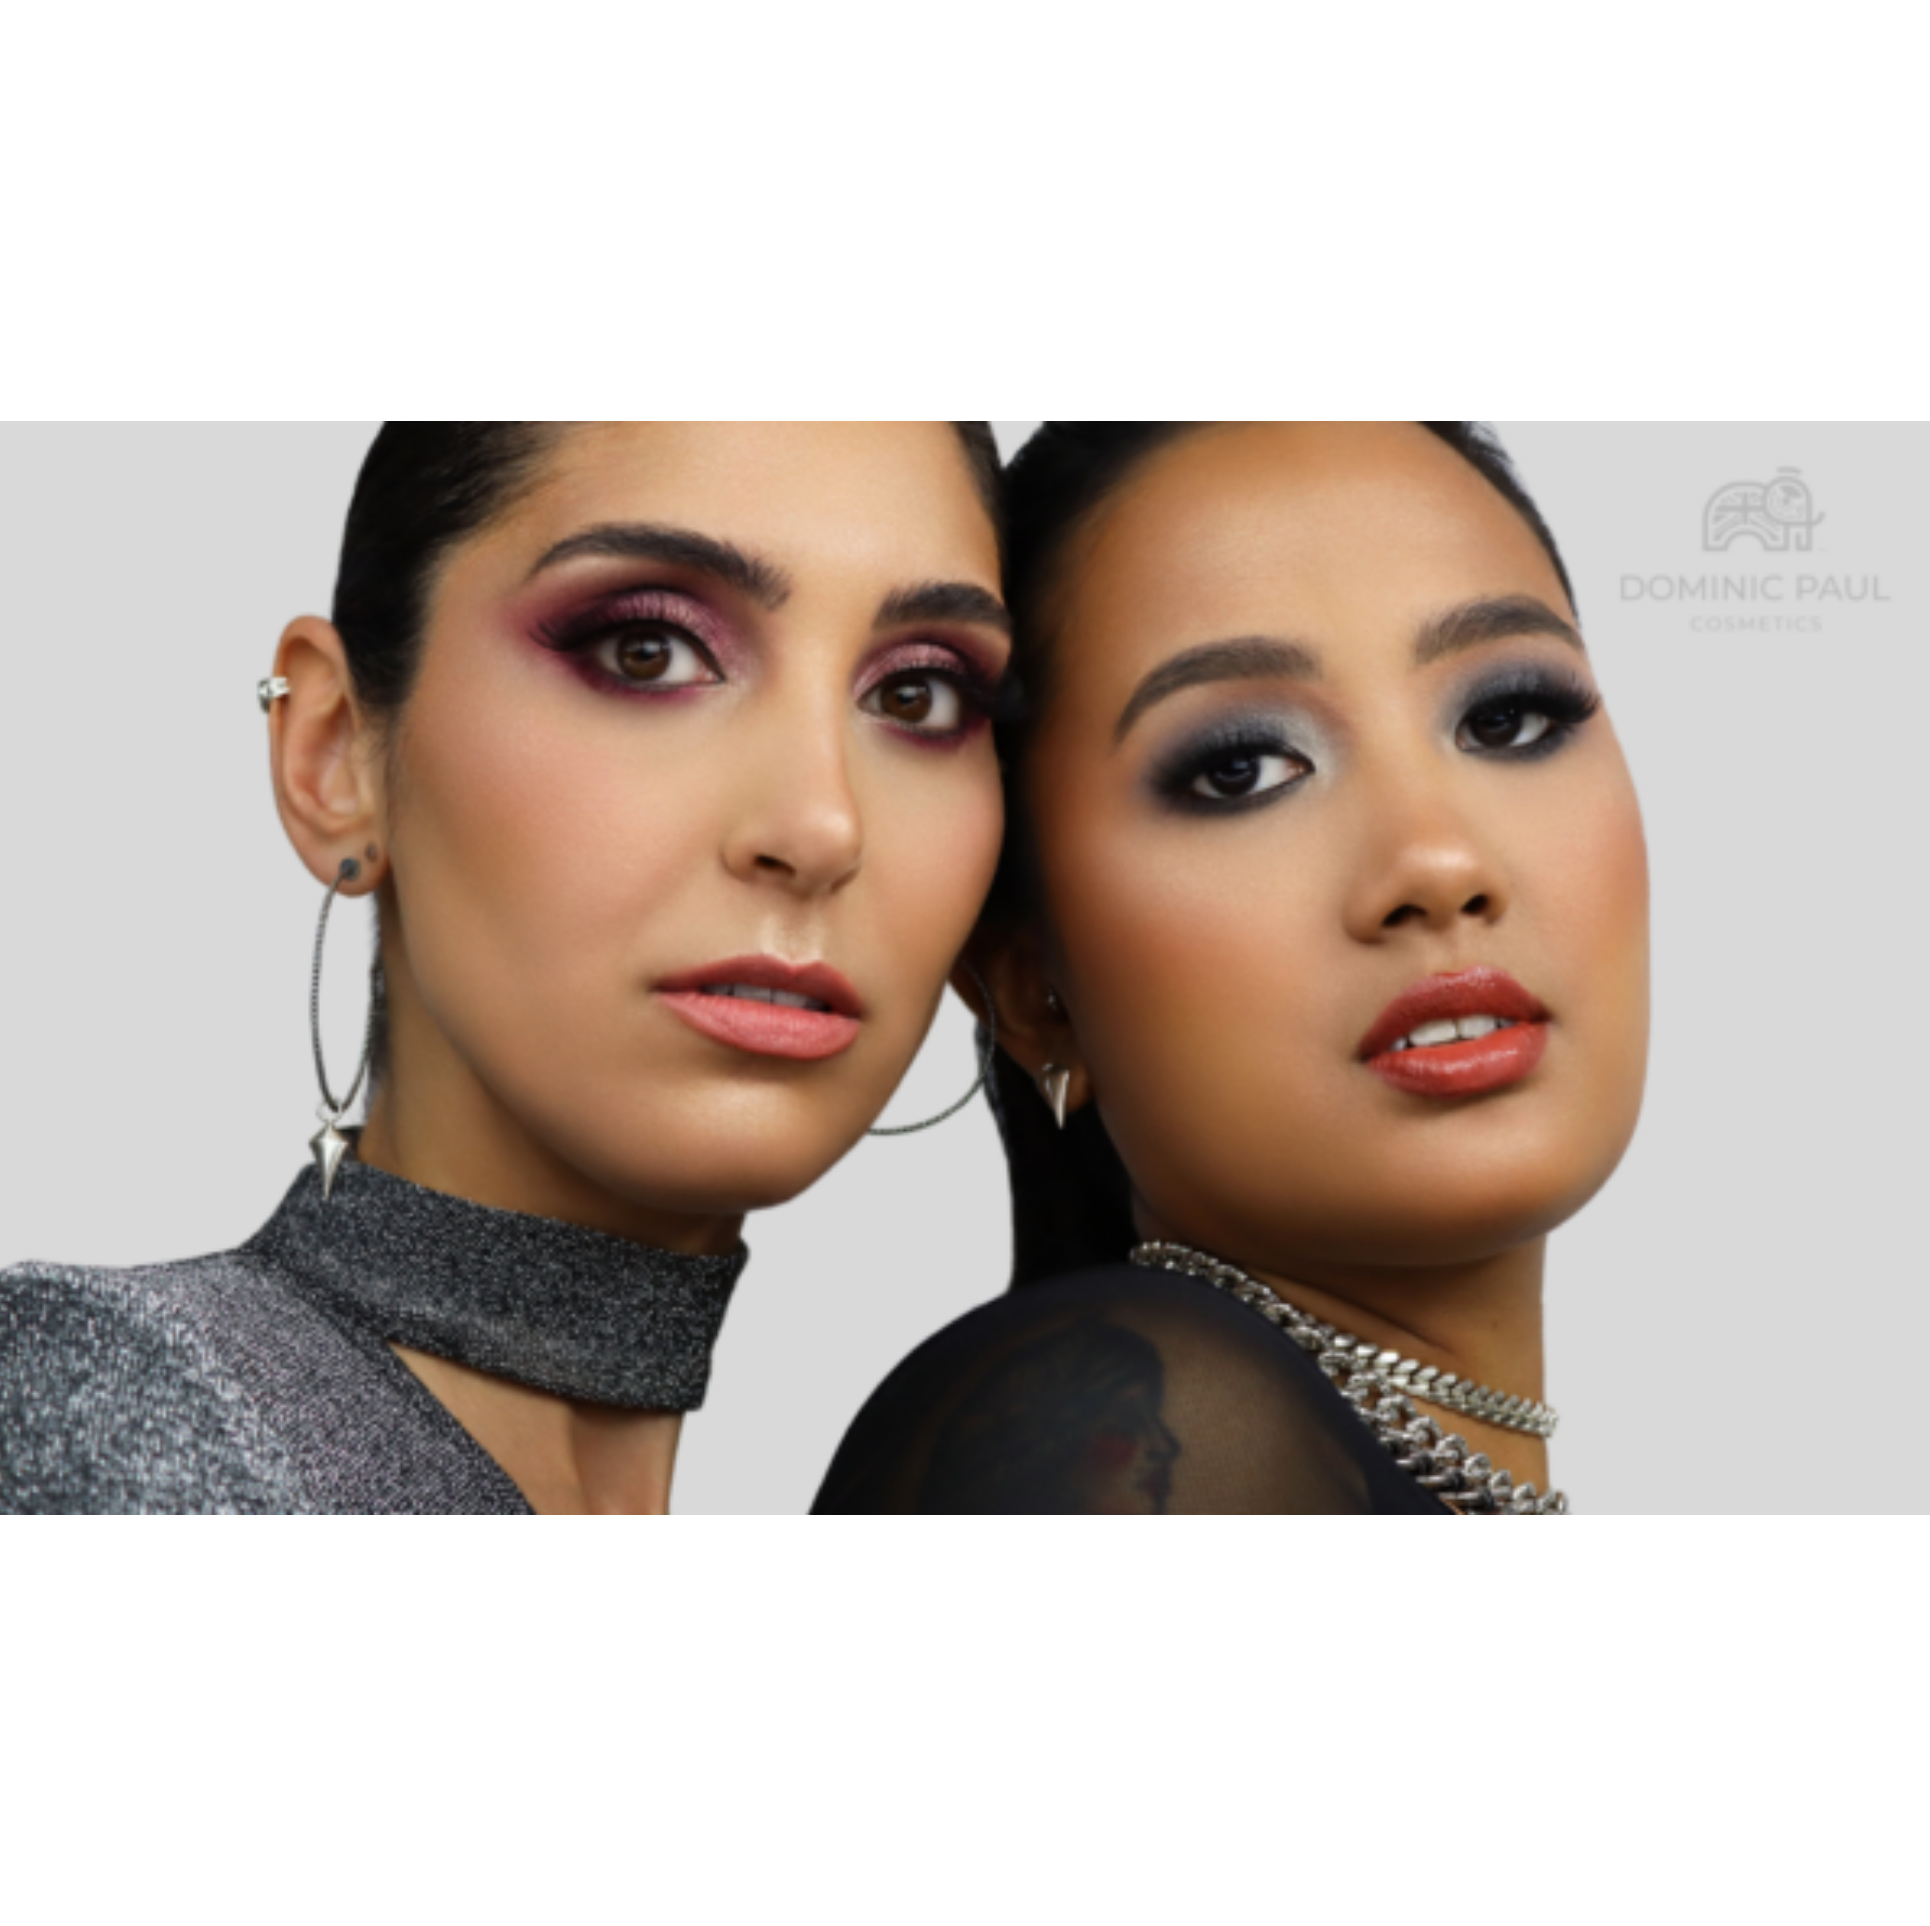 Two models wearing Dominic Paul The Culture Palette